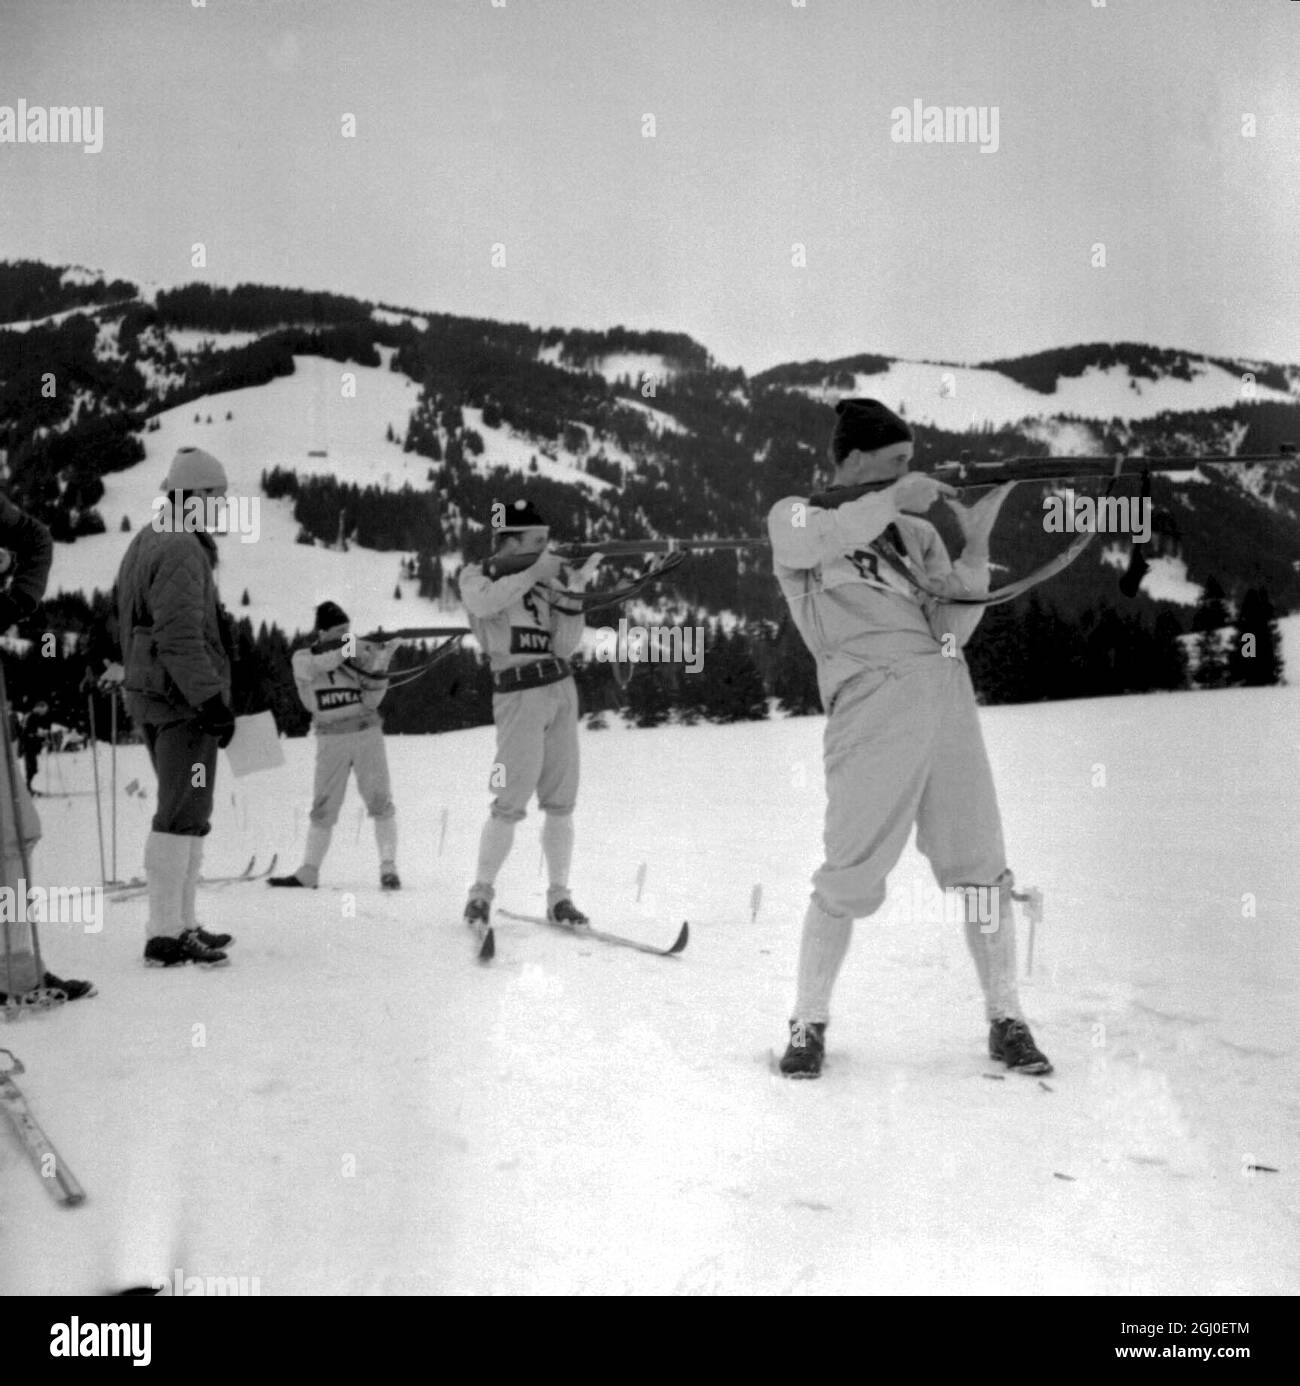 Oberjoch, Southern Germany: Three members of the British Biathlon team training for the 1964 Olympic Games, compete in the British, the British Army and BAOR ski championships (cross country) at Oberjoch, Southern Germany on February 11th. During the twelve and a half miles cross country race, skiers fire at four separate ranges, here having completed most of the course. From right, Gunner David Rees (21) of Farmers Arms, Elynmoch, Ammanford, S Wales; Lt Robin Dent (24) of Hove, Sussex and Gunner Frederick Andrew (21) of Strathblane, Stirlingshire, Scotland, who fire on the 100 metre range fro Stock Photo